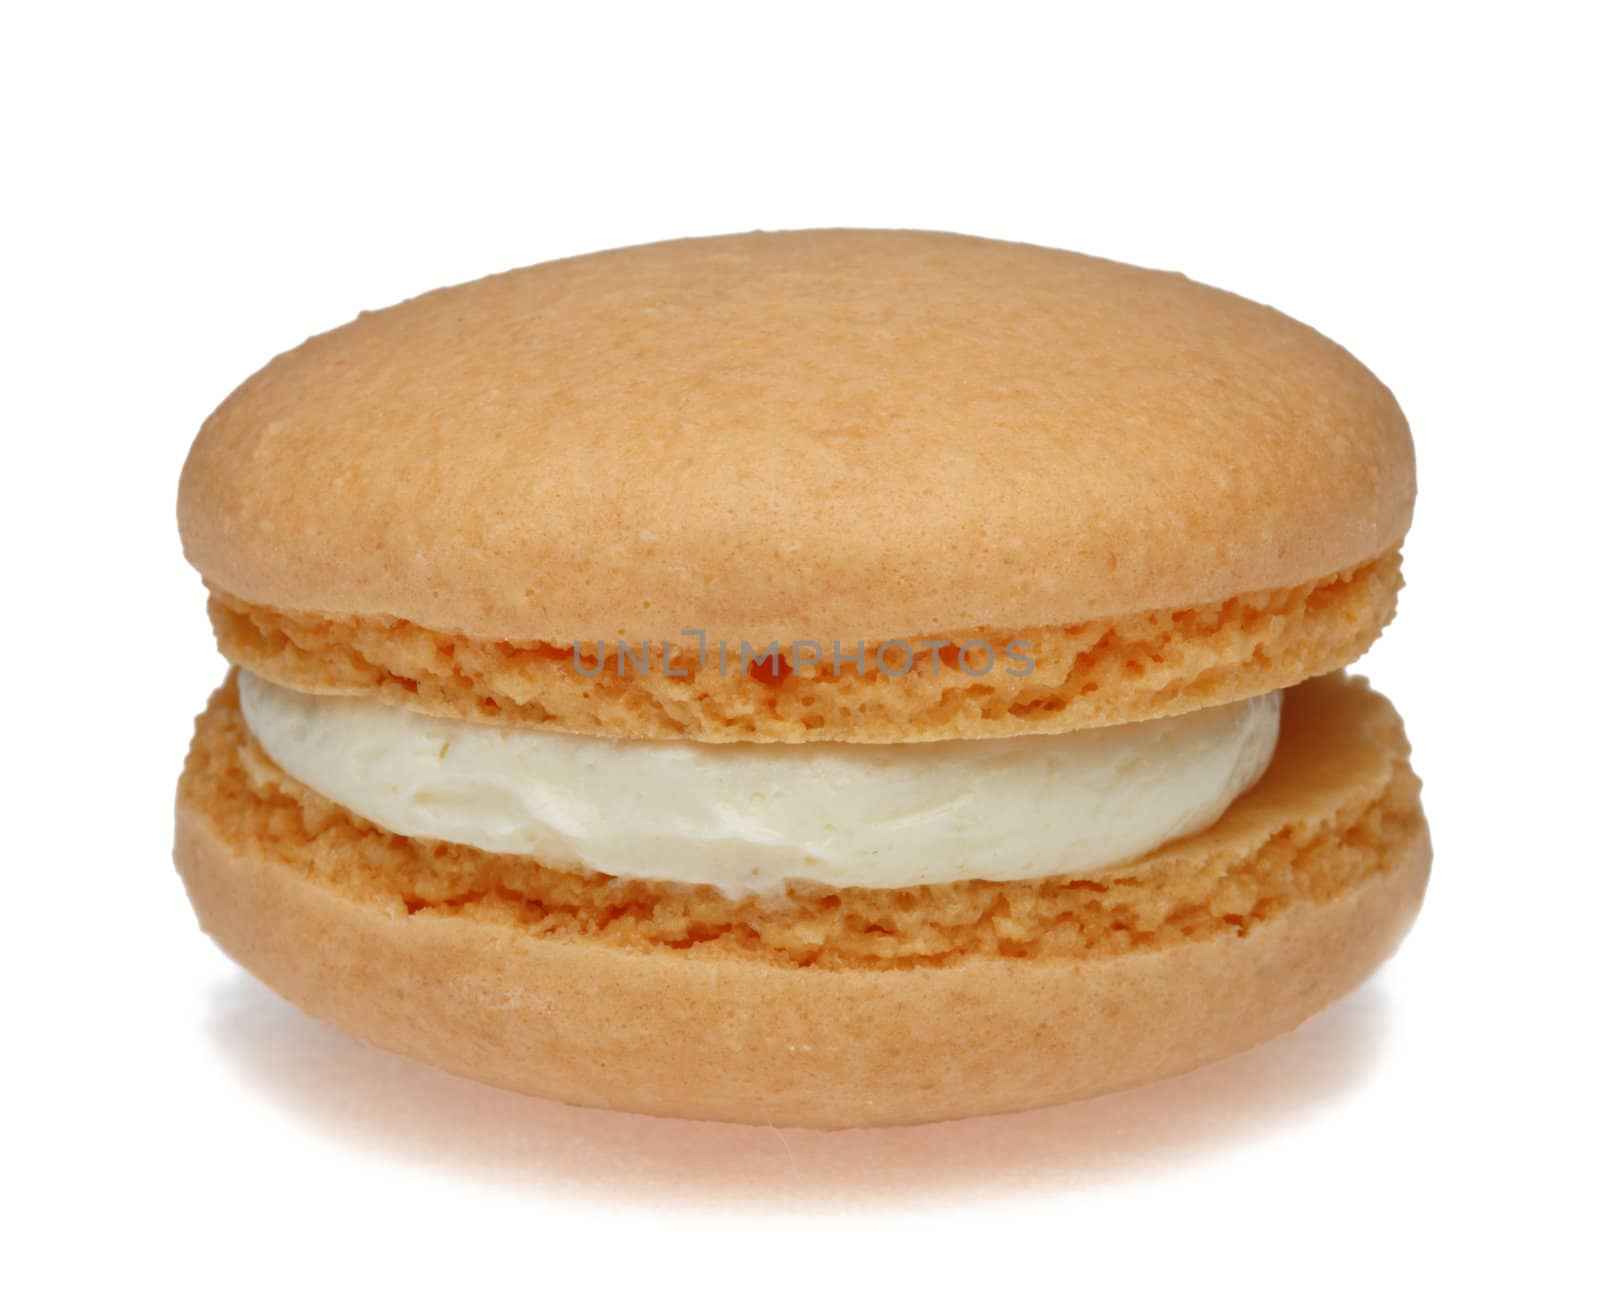 Image of a traditional French orange macaron against a white background.